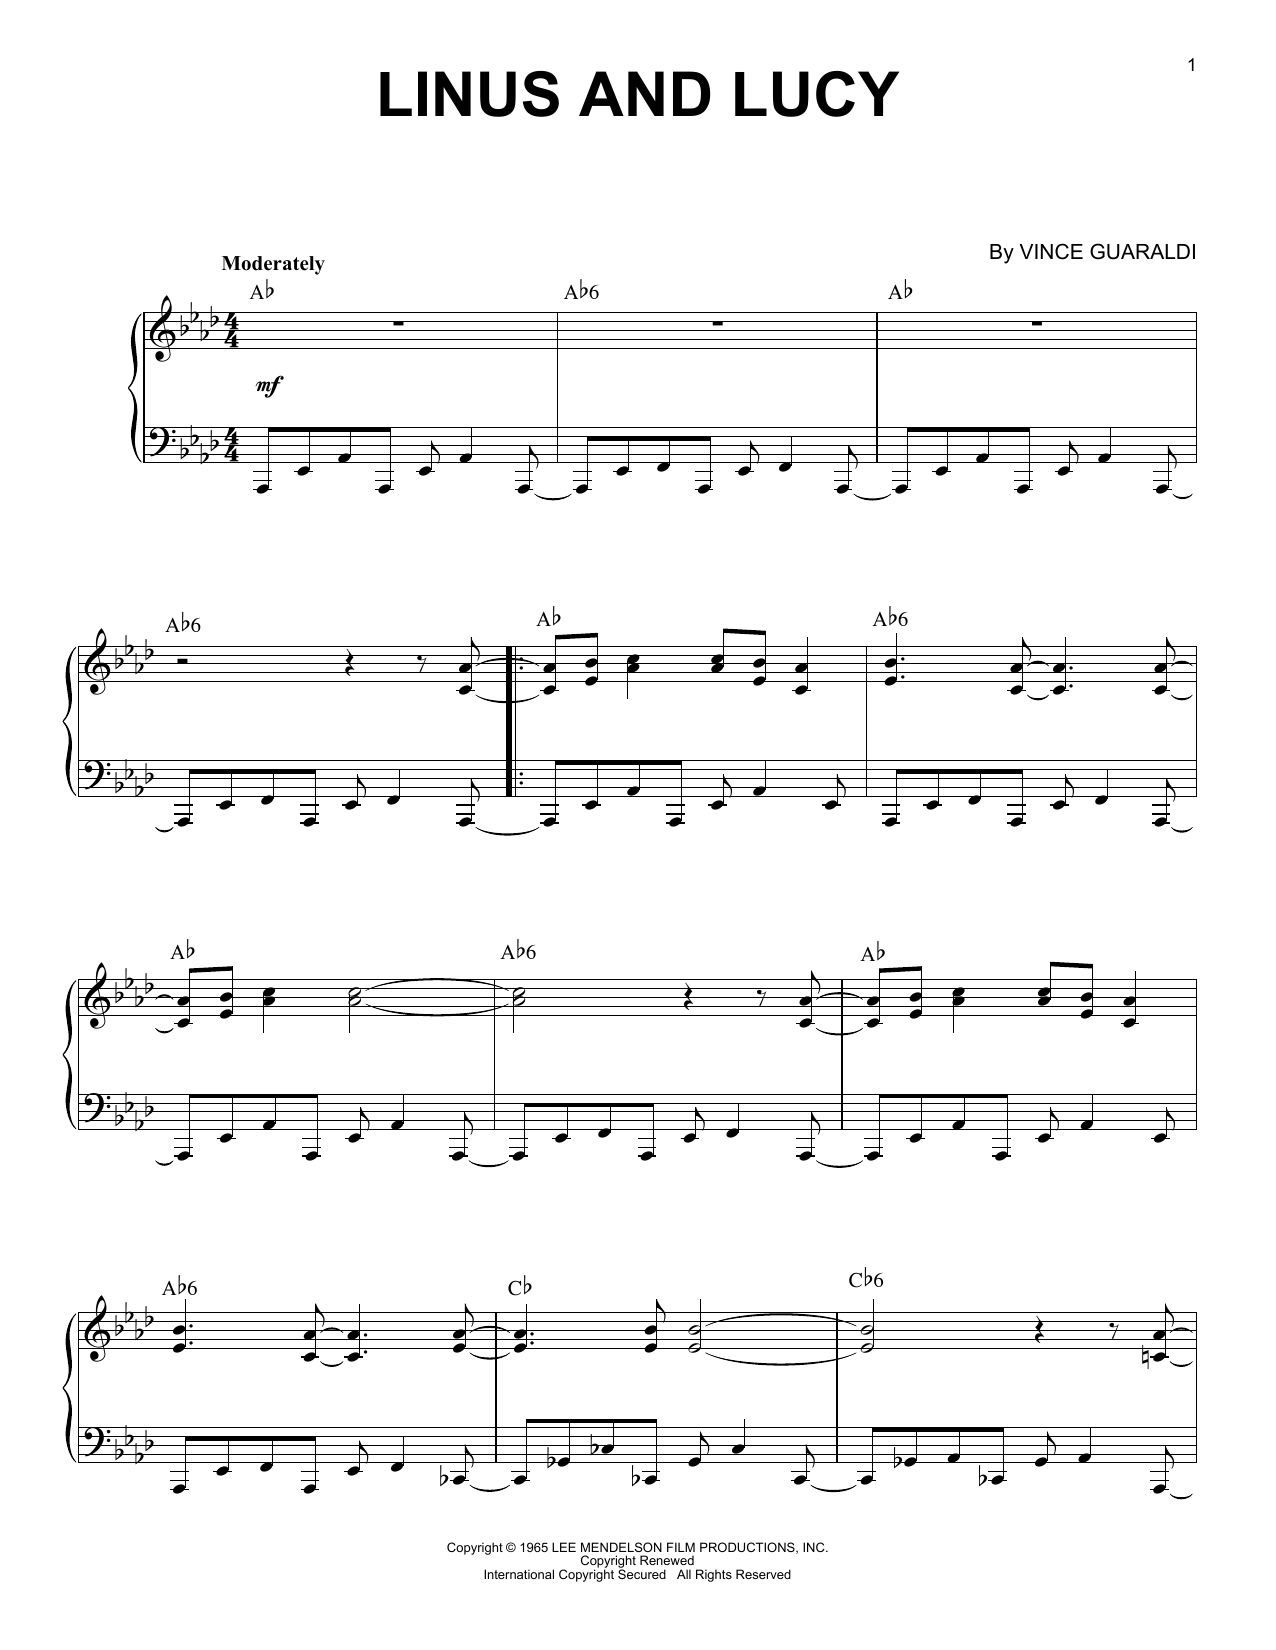 Vince Guaraldi Linus And Lucy sheet music notes and chords. Download Printable PDF.